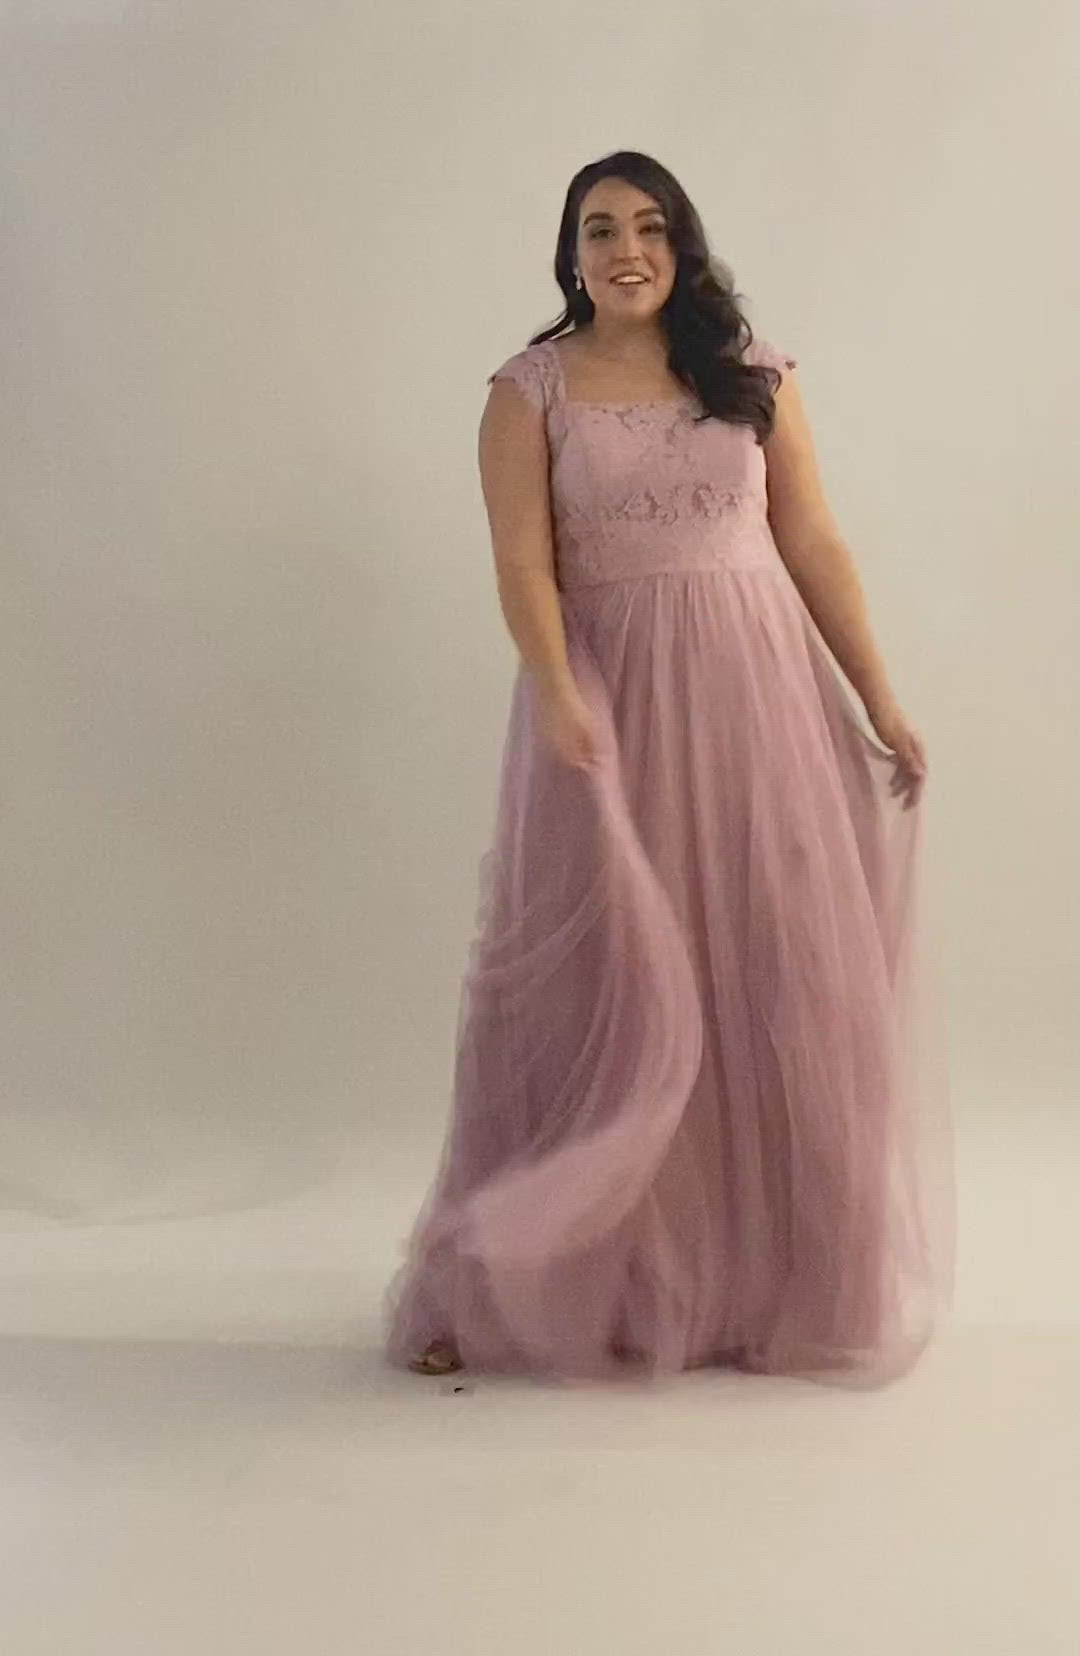 Video of lace bodice with strap sleeves and a square neck and tulle skirt. Modest Dresses - Modest Prom Dress - Formalwear Modest Dresses - Bridesmaid Modest Dresses.